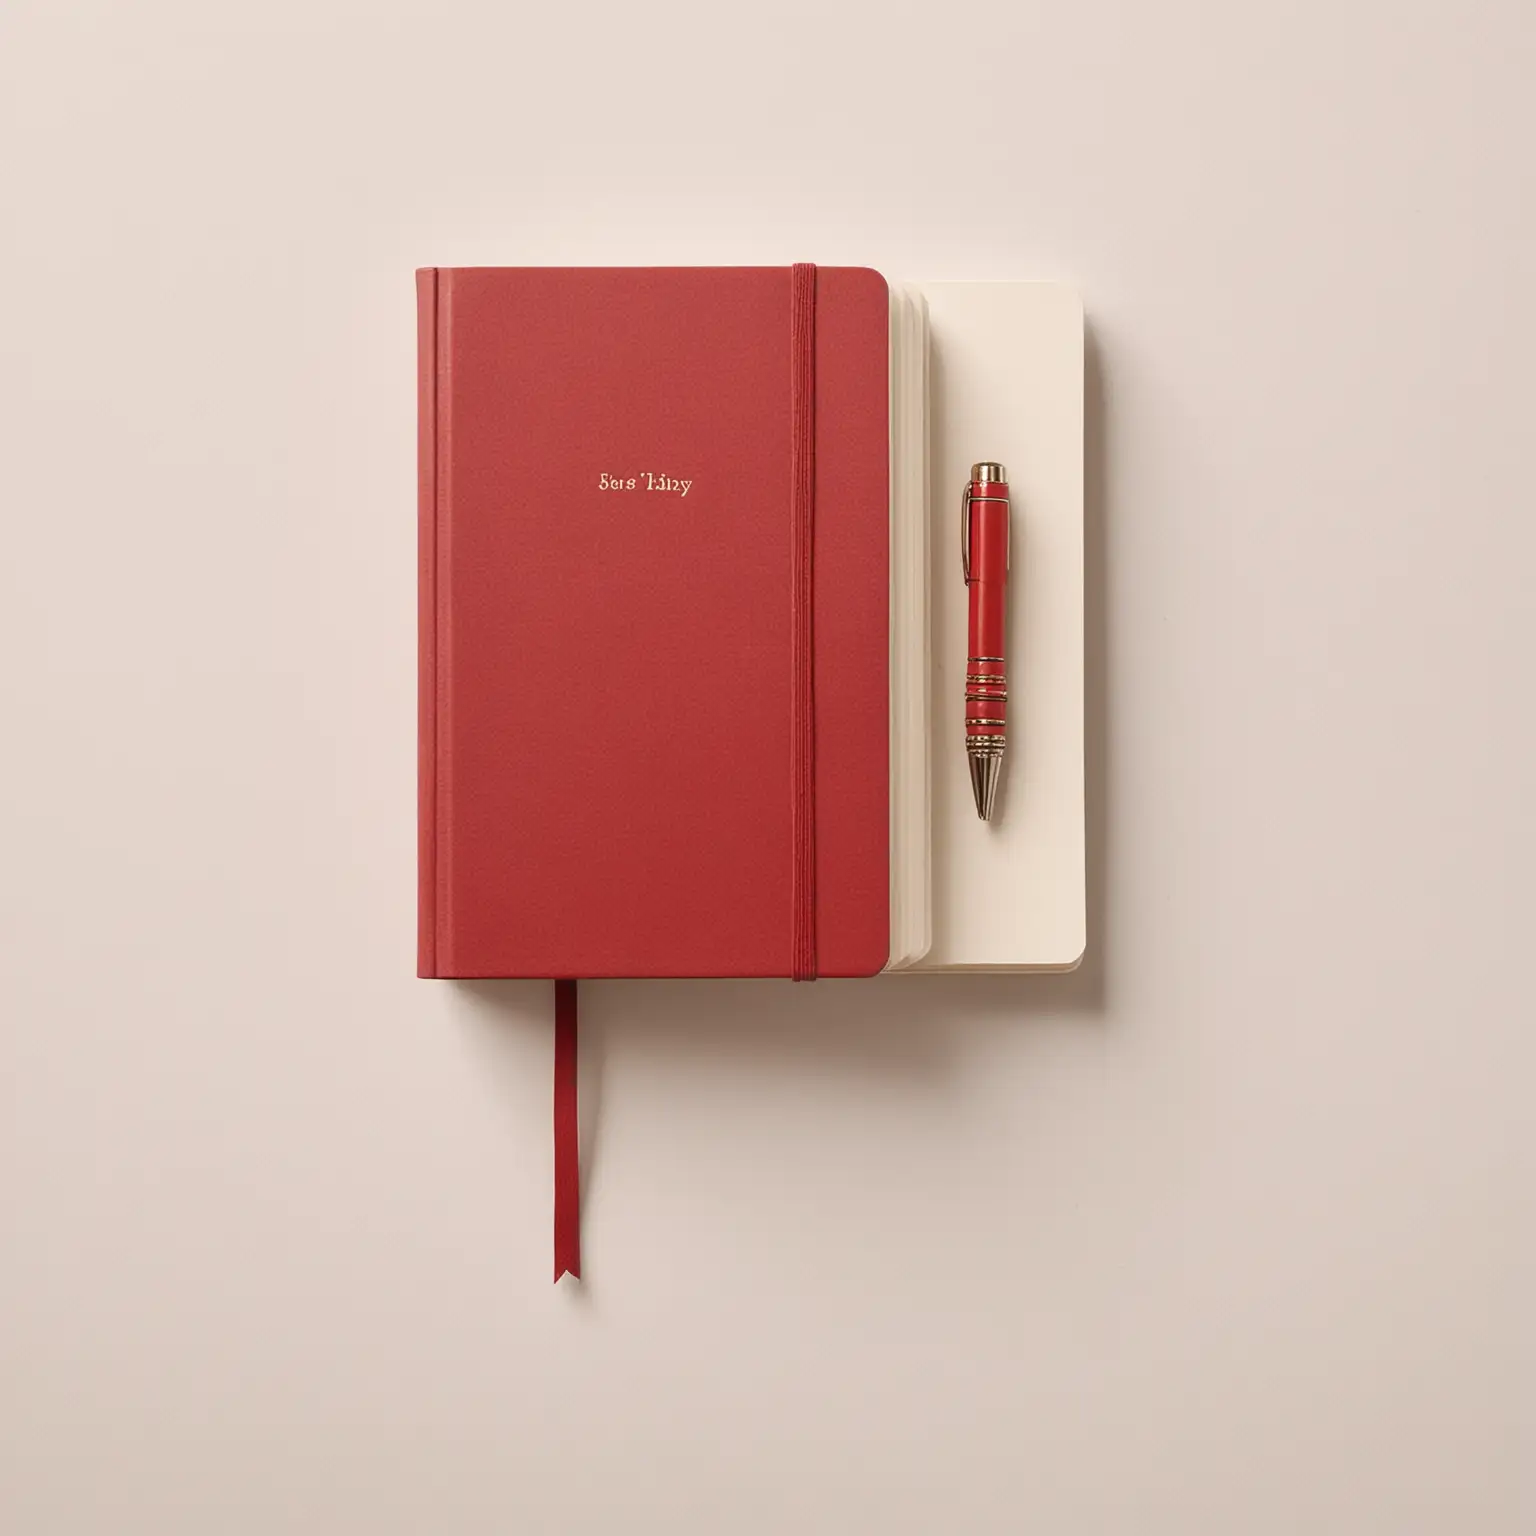 a red diary sitting on a white background
